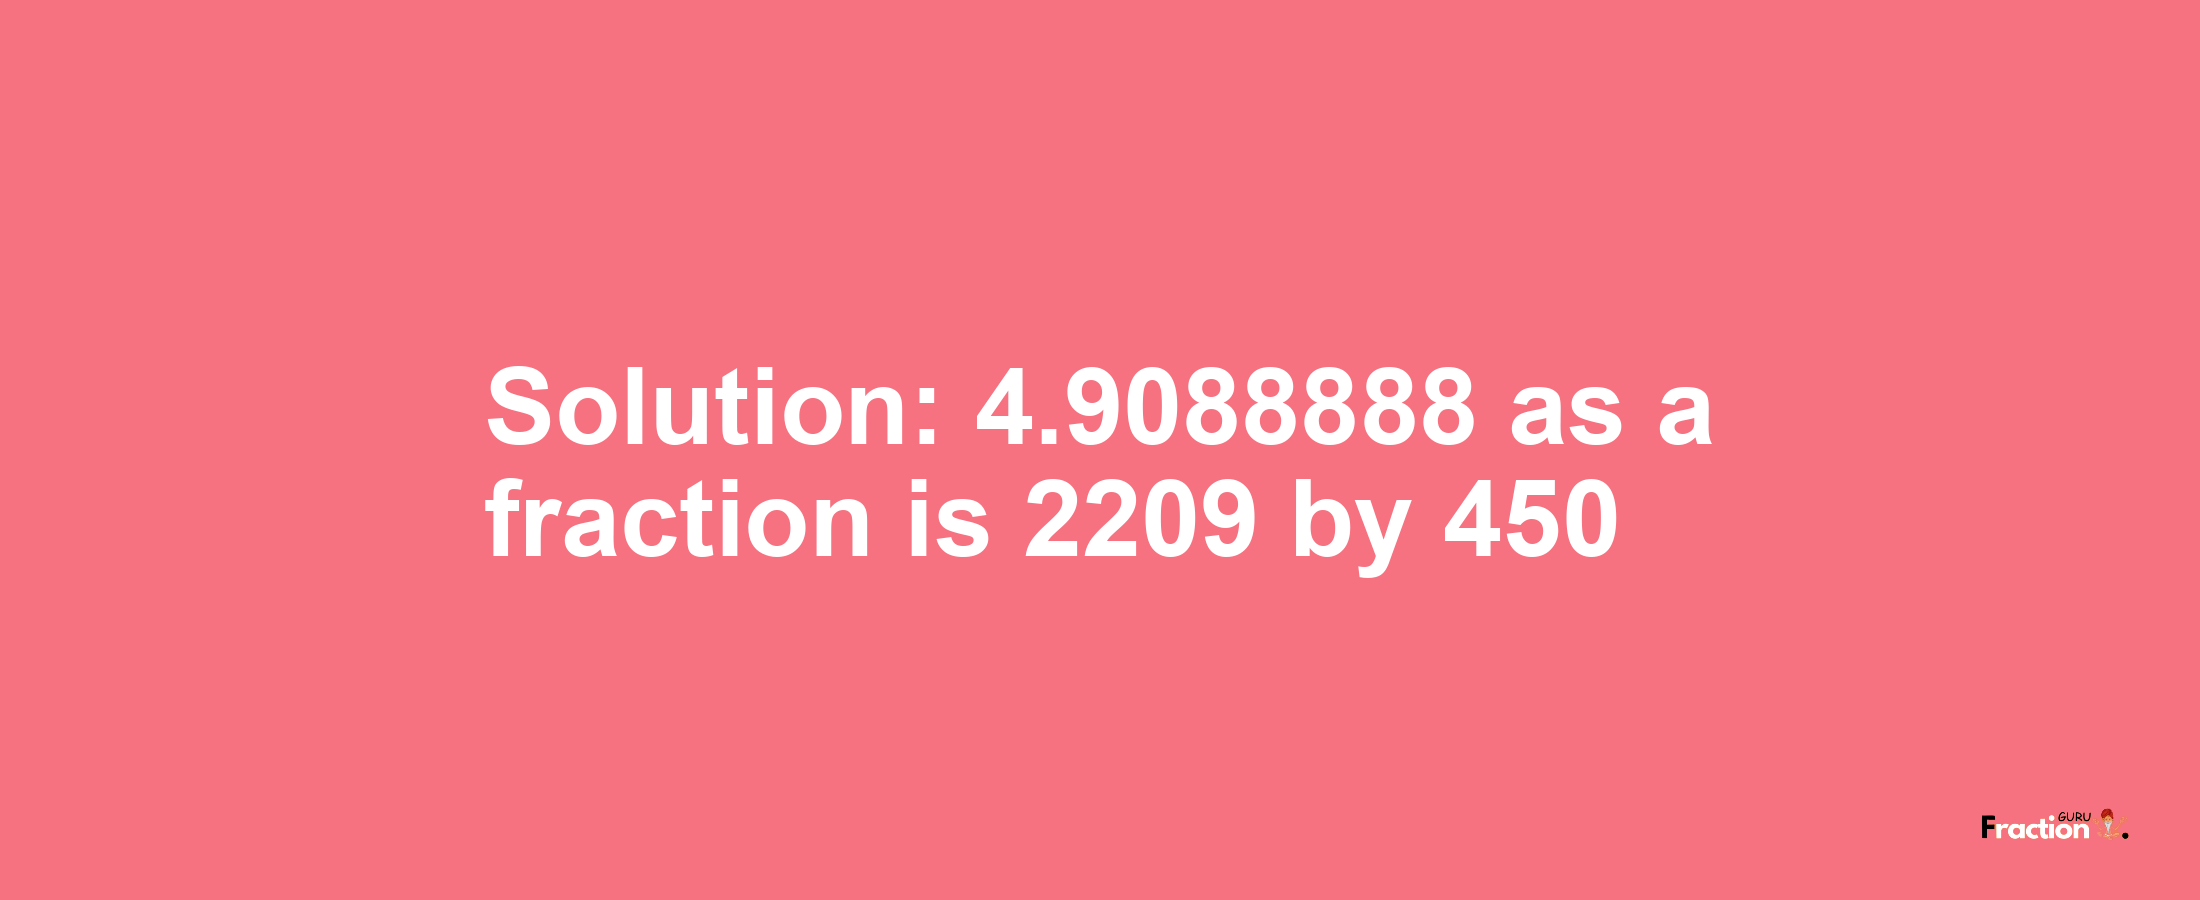 Solution:4.9088888 as a fraction is 2209/450